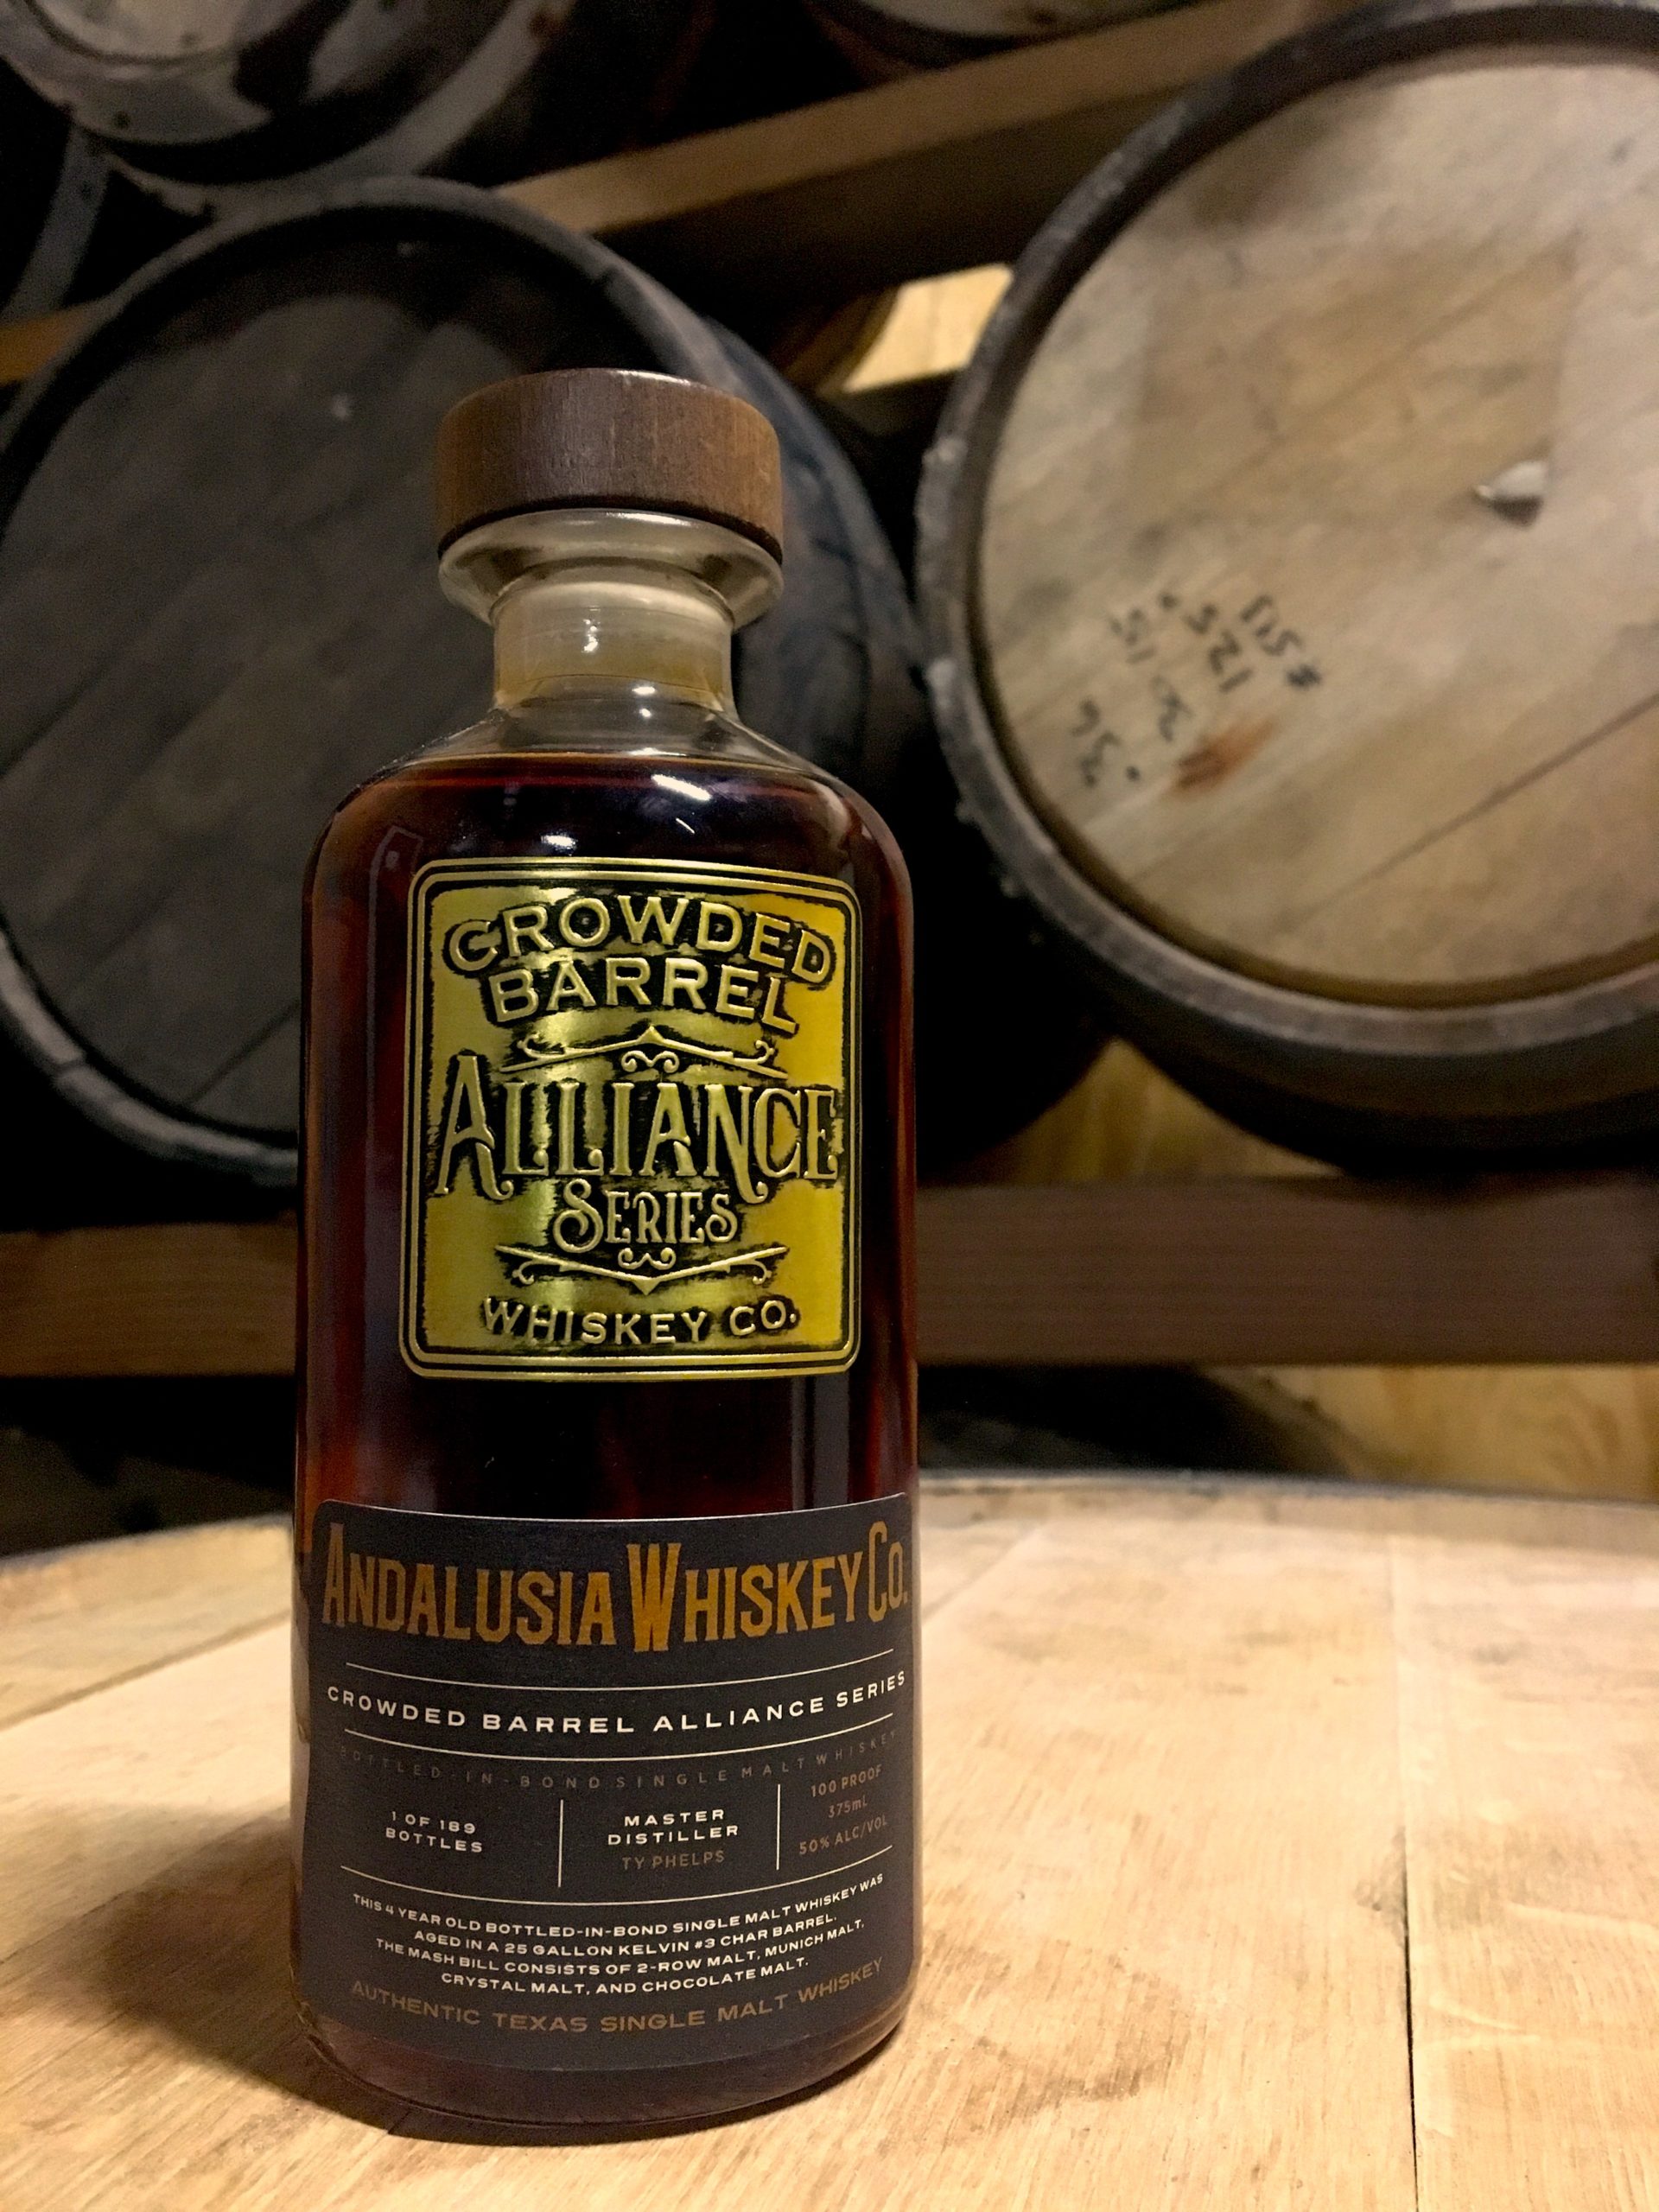 Andalusia Whiskey Co